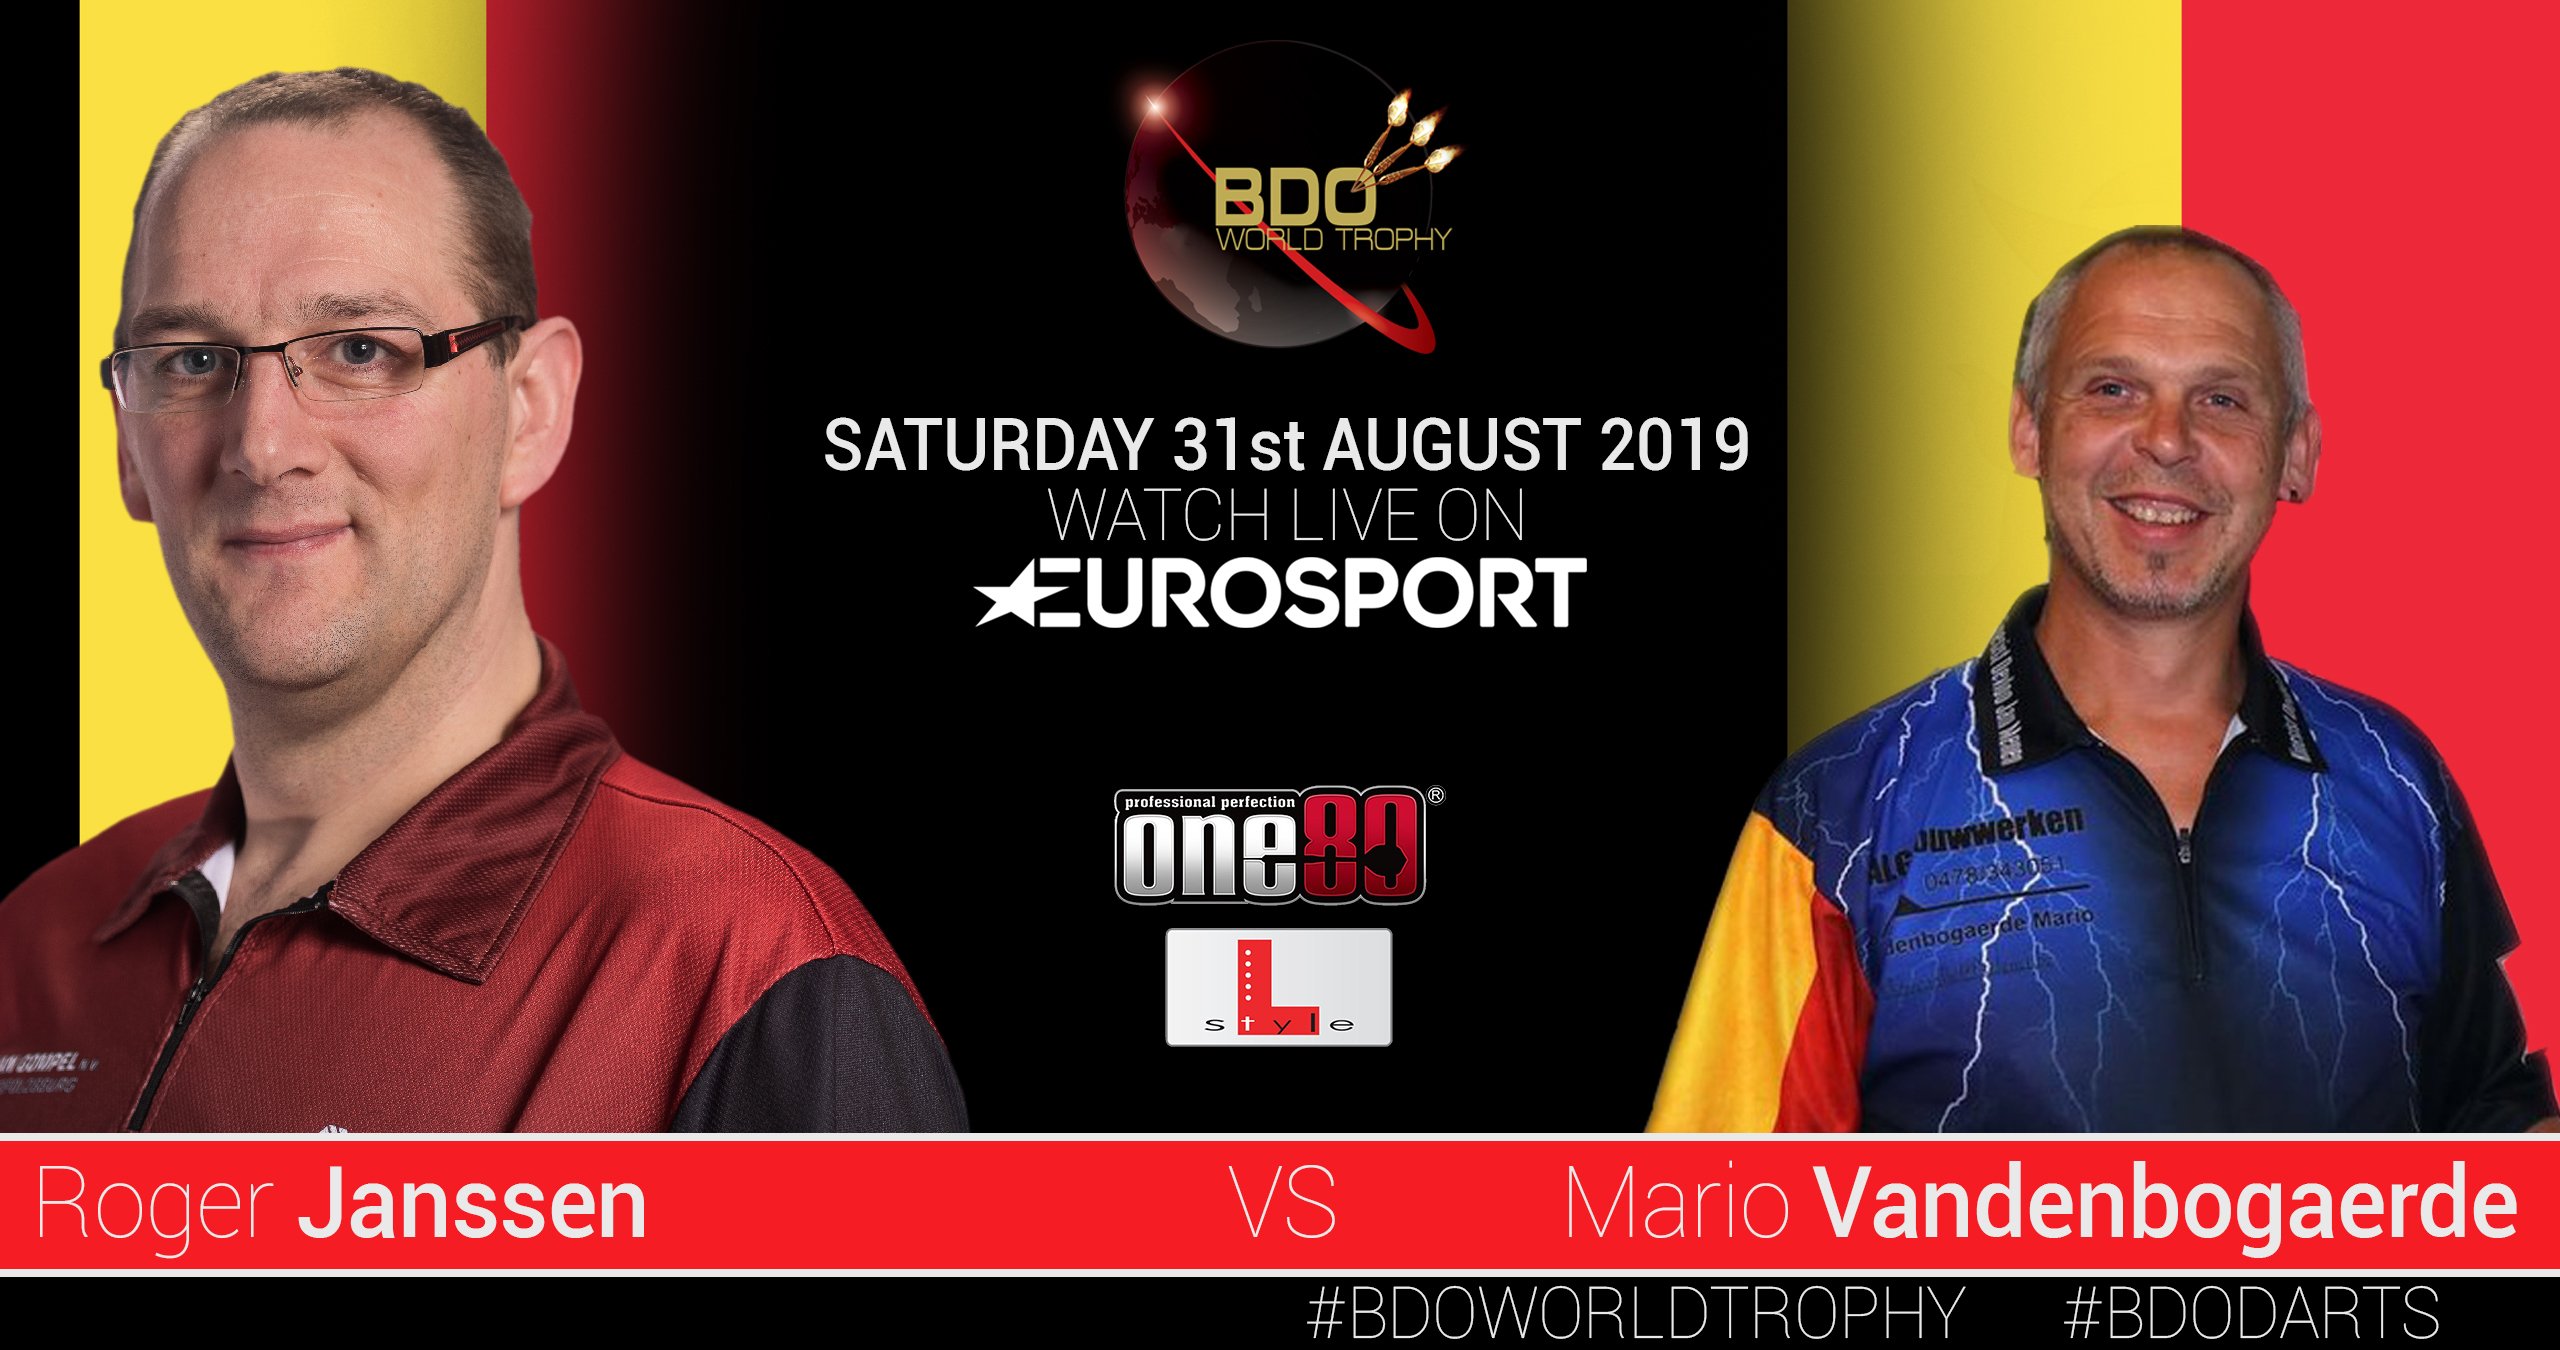 BDO Darts on Twitter: "WINNER Roger Janssen 5⃣ - 3⃣ Mario Vandenbogaerde  'Gizmo' wins the battle of the Belgian's as he displays some superb  composure on the outer ring to reach the